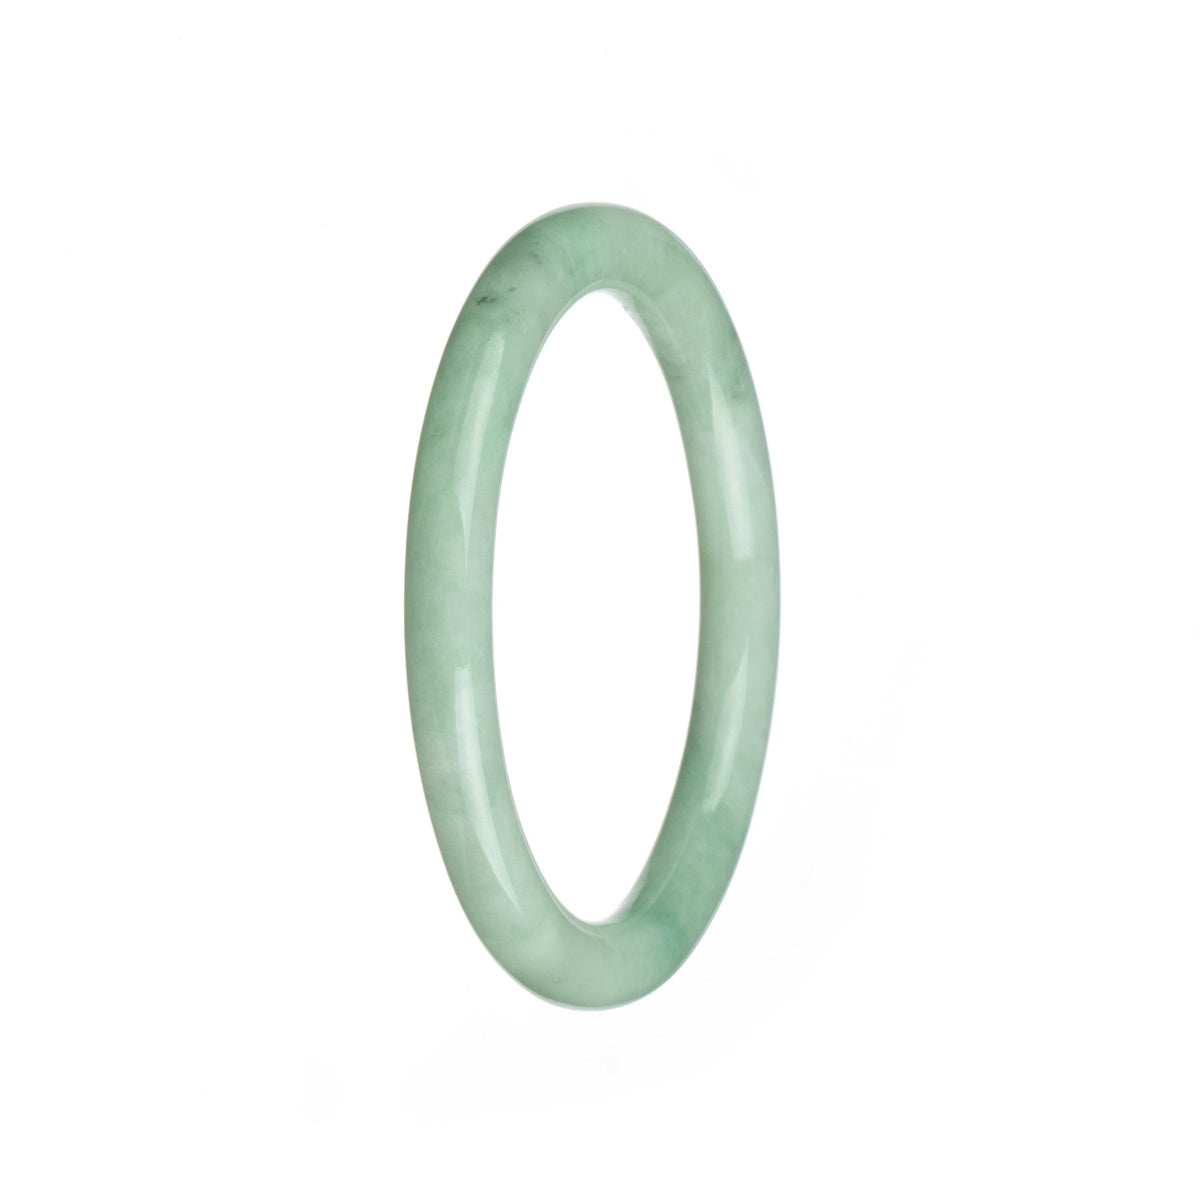 A small round light green jadeite bracelet, untreated and authentic, measuring 59mm in size. Perfect for adding a touch of natural elegance to any outfit.